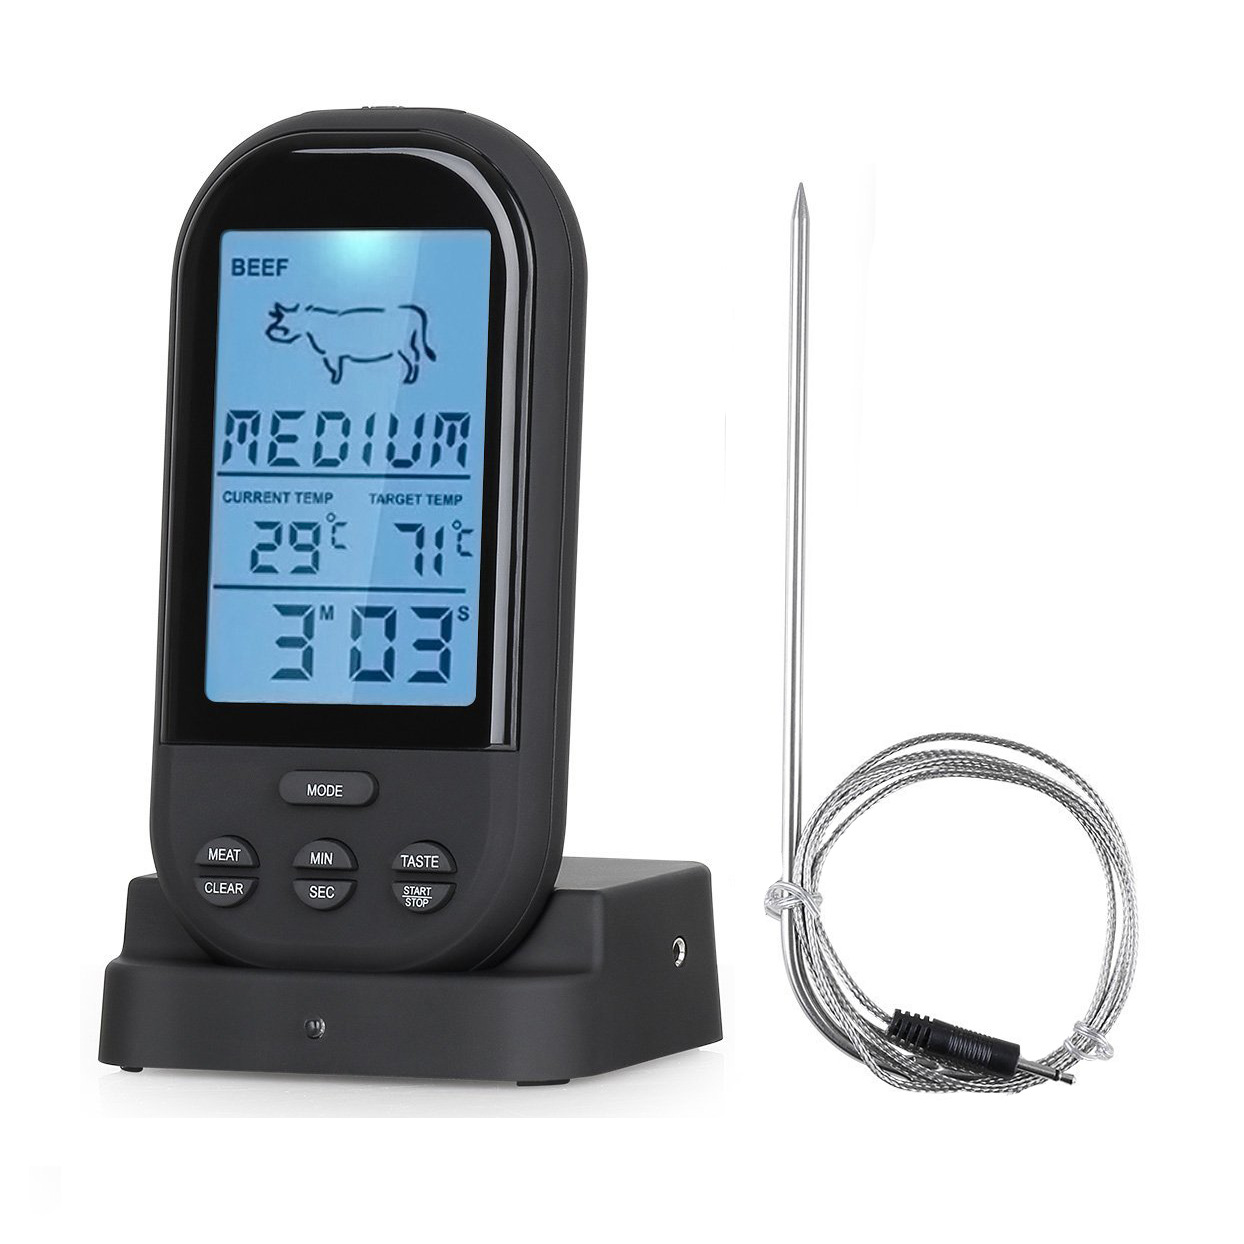 SD-E8010B Black colour Wireless Timer and Thermometer